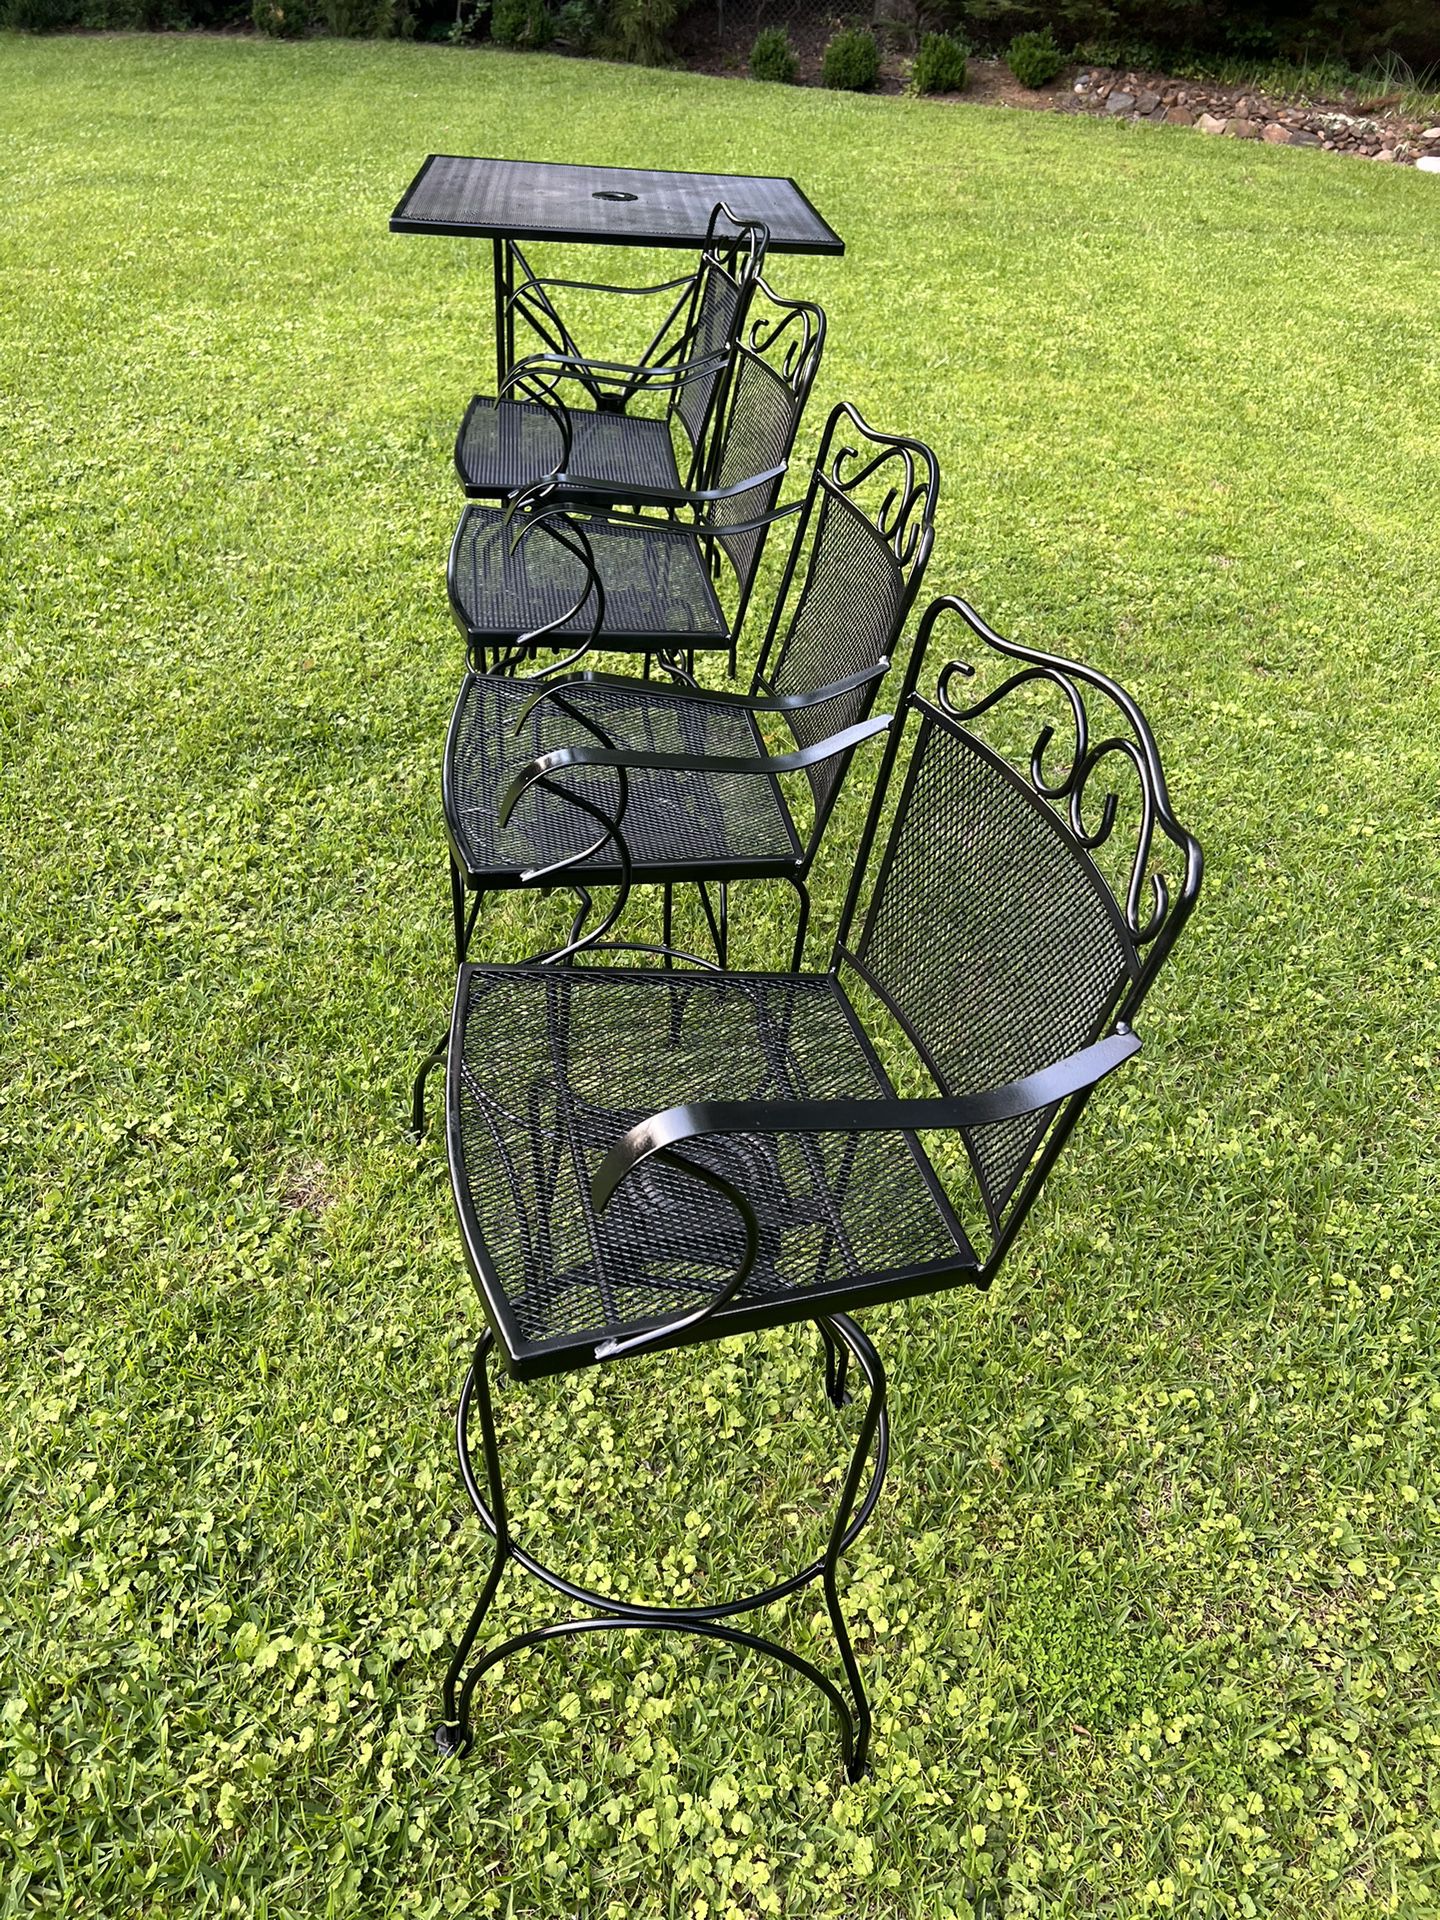 REFINISHED UNIQUE Plantation Patterns wrought iron SWIVEL stools and square table $349 CAN DELIVER!